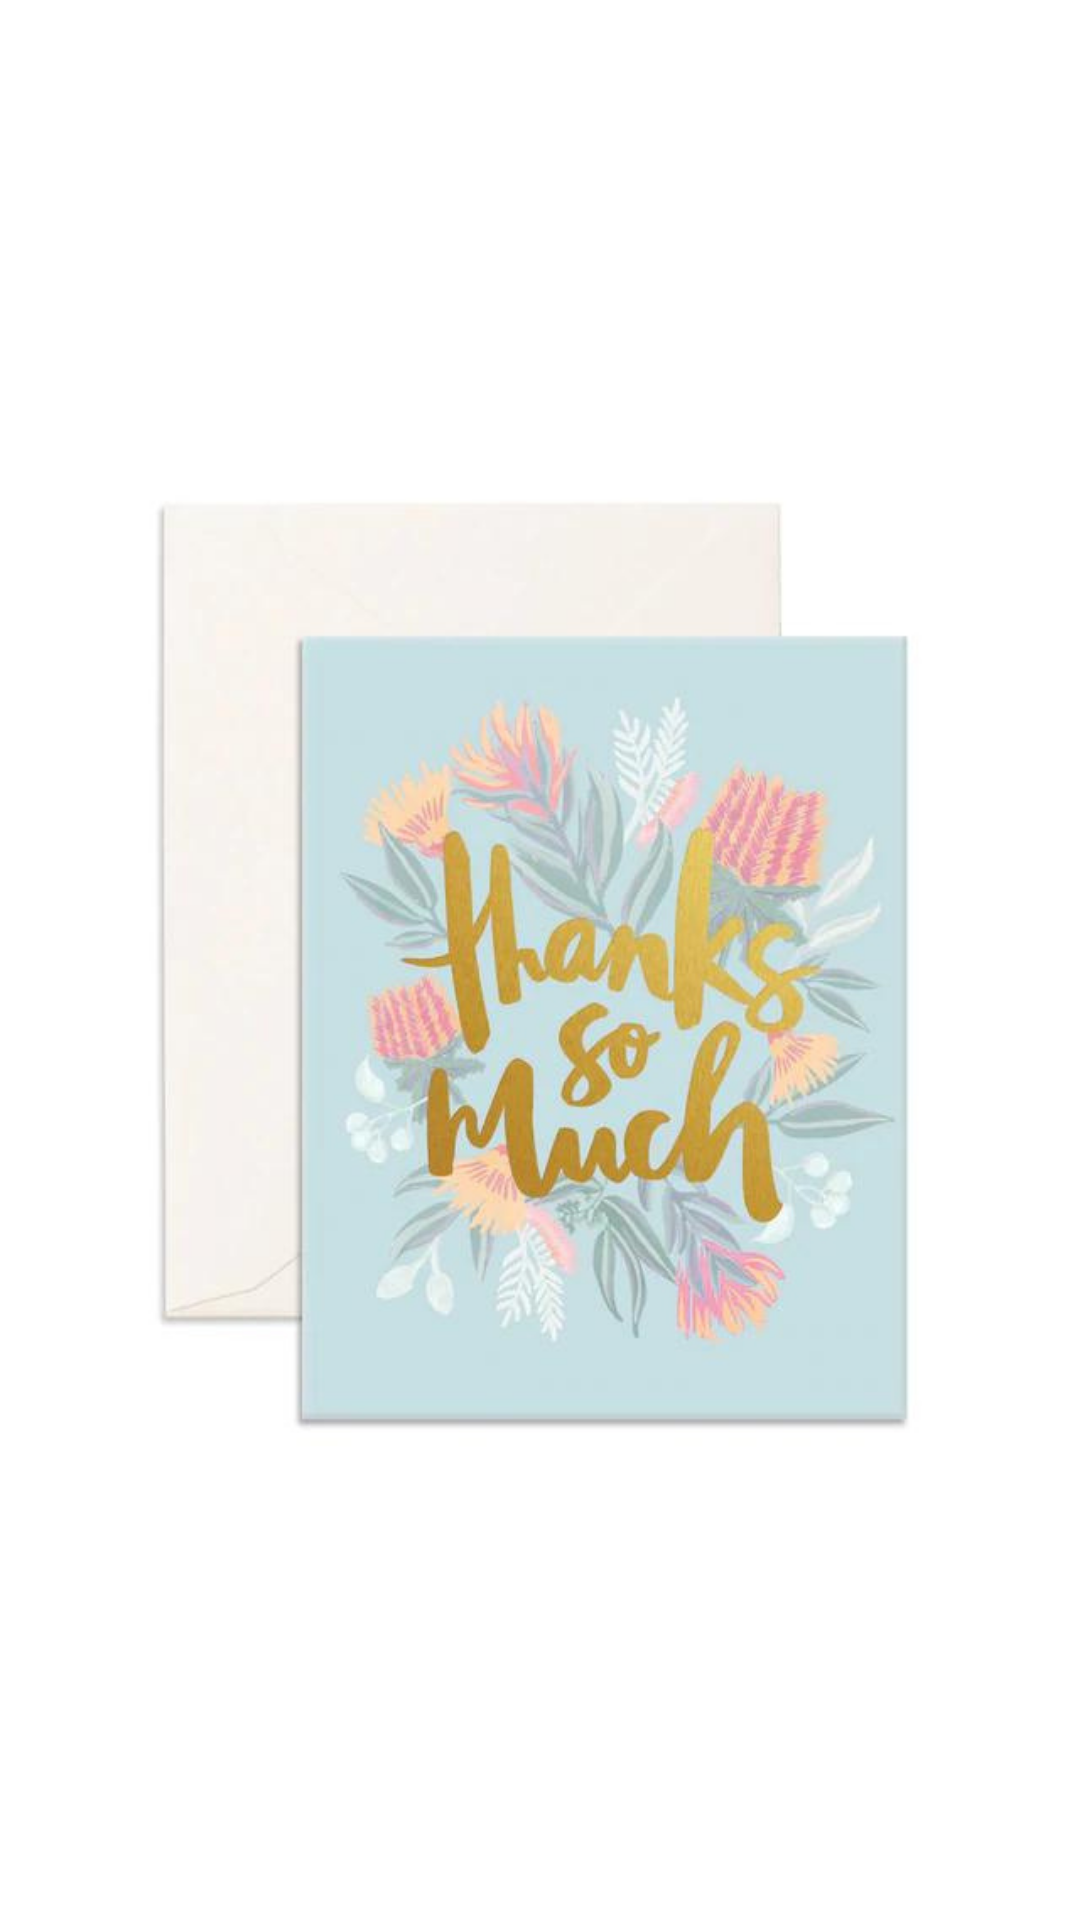 Fancy Cards 3 for $15